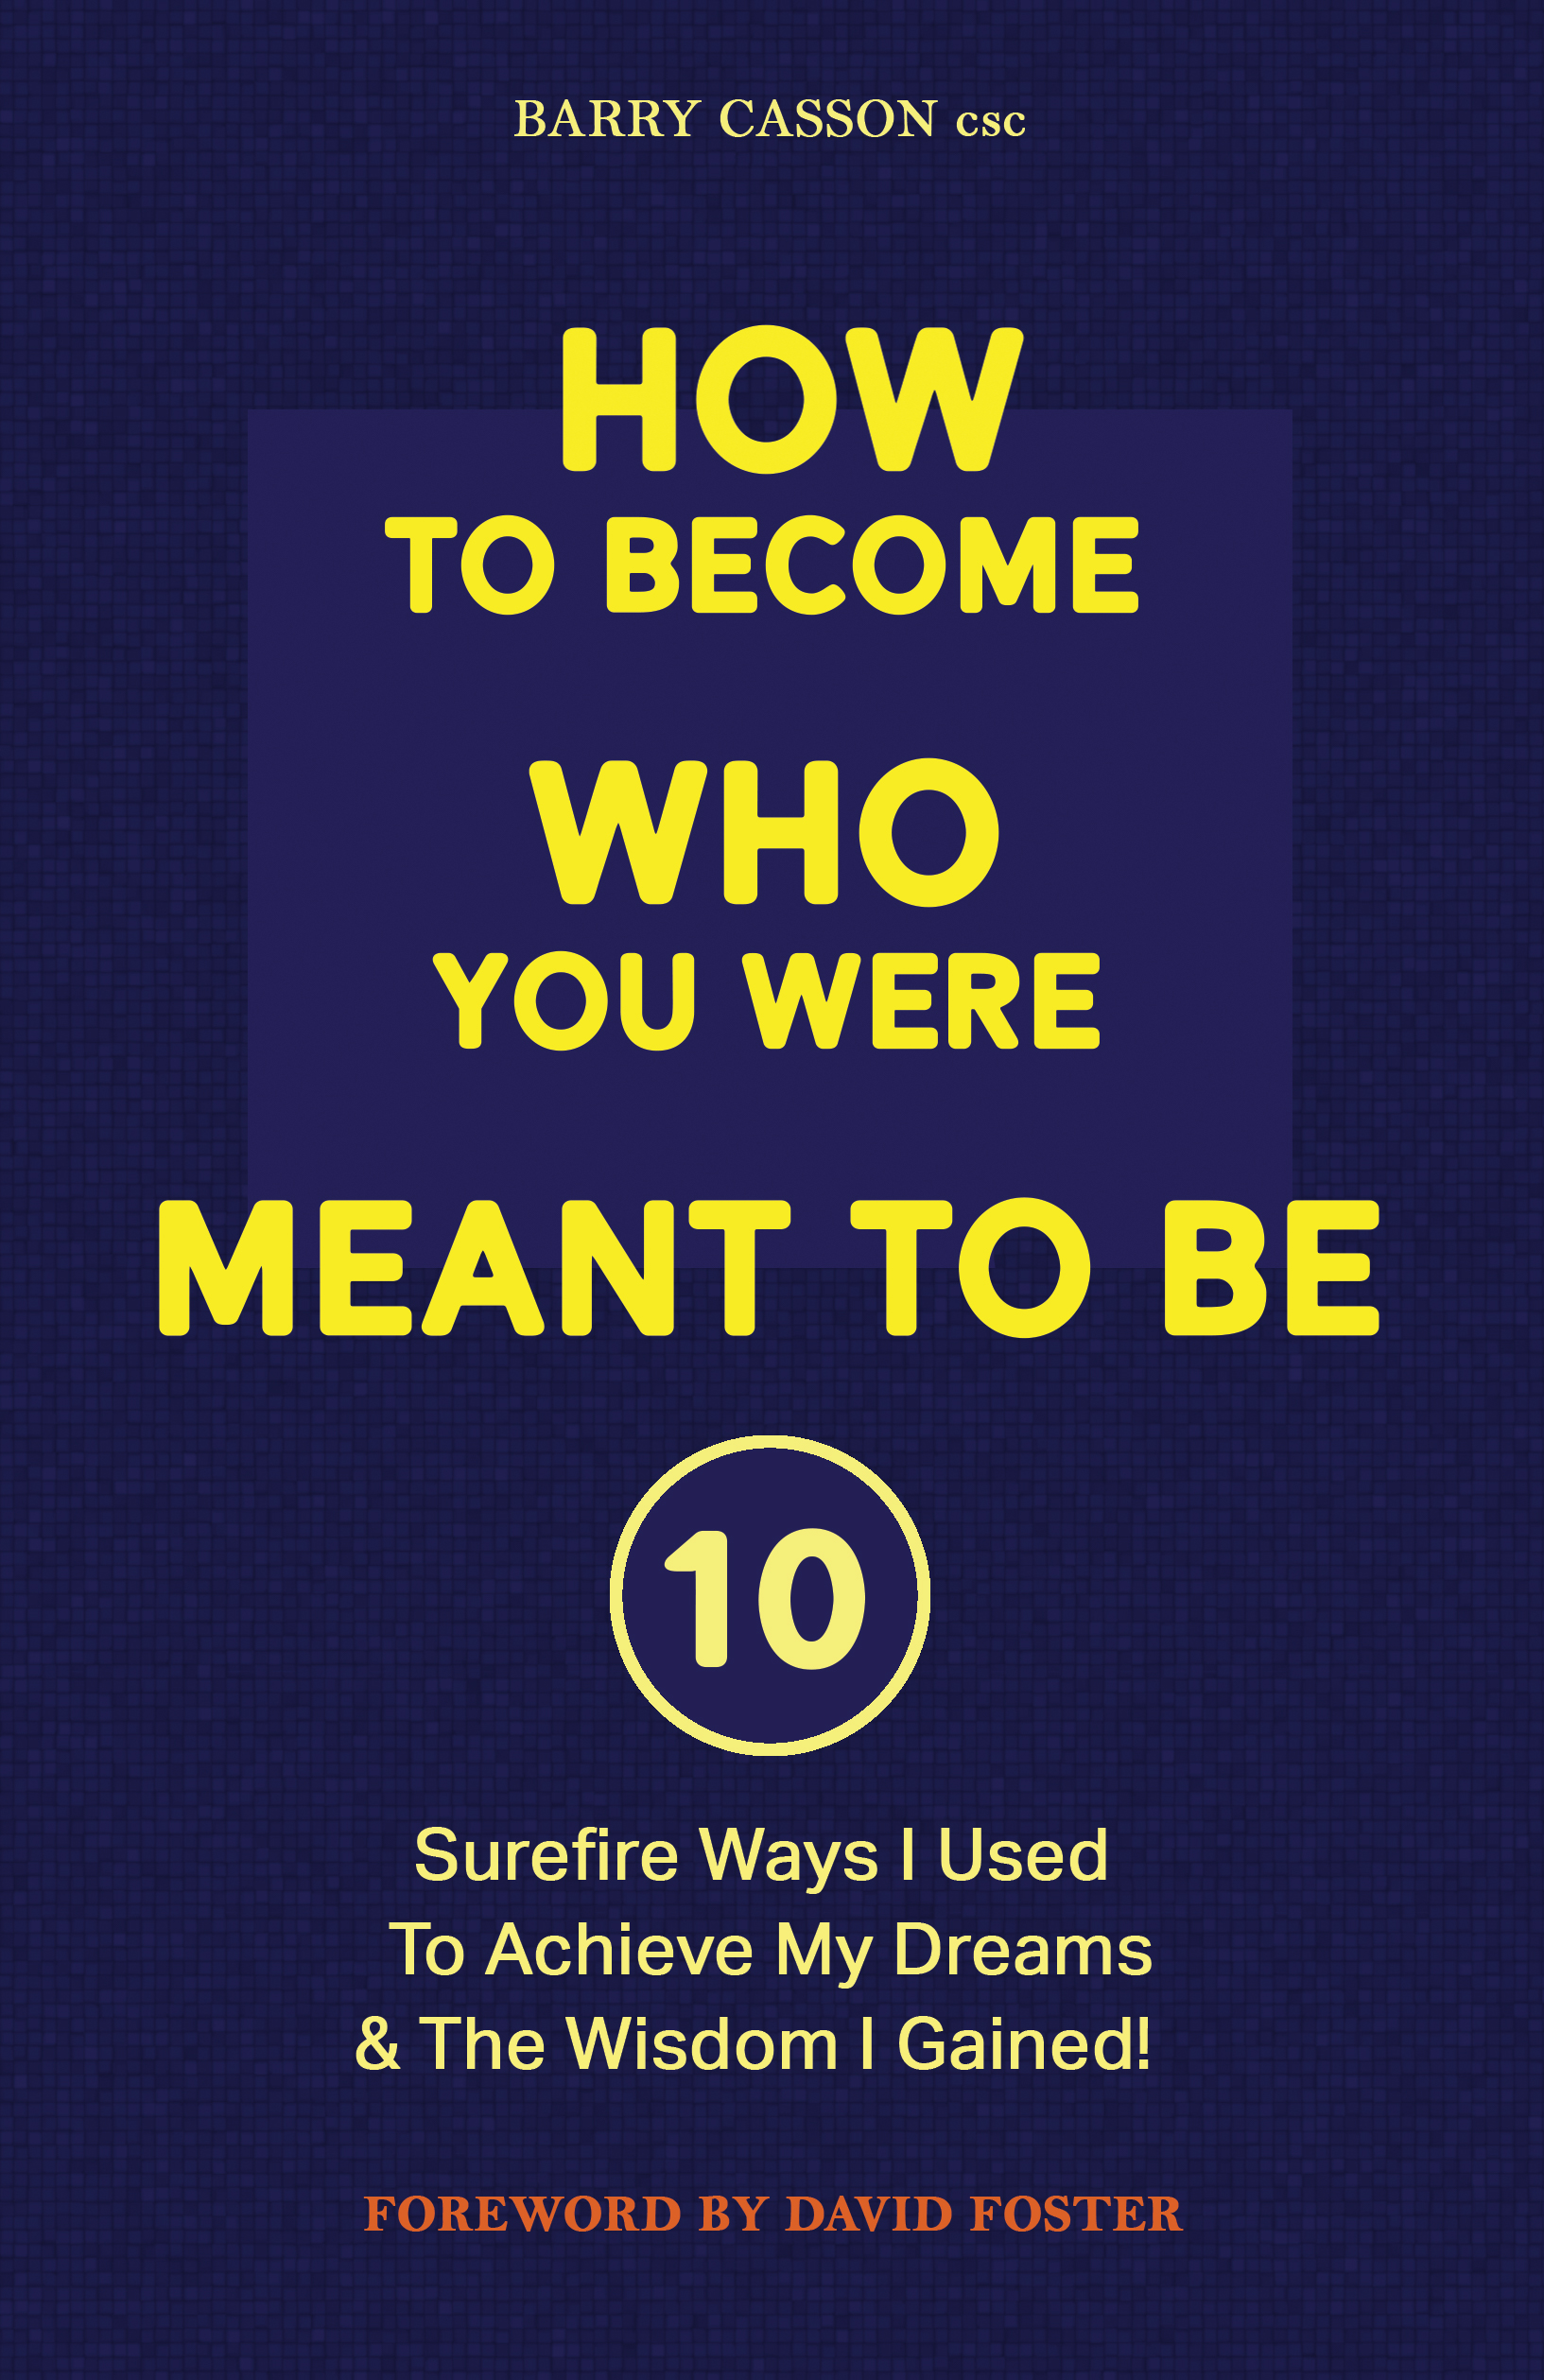 How To Become Who You Were Meant To Be by Barry Casson Foreward by David Foster